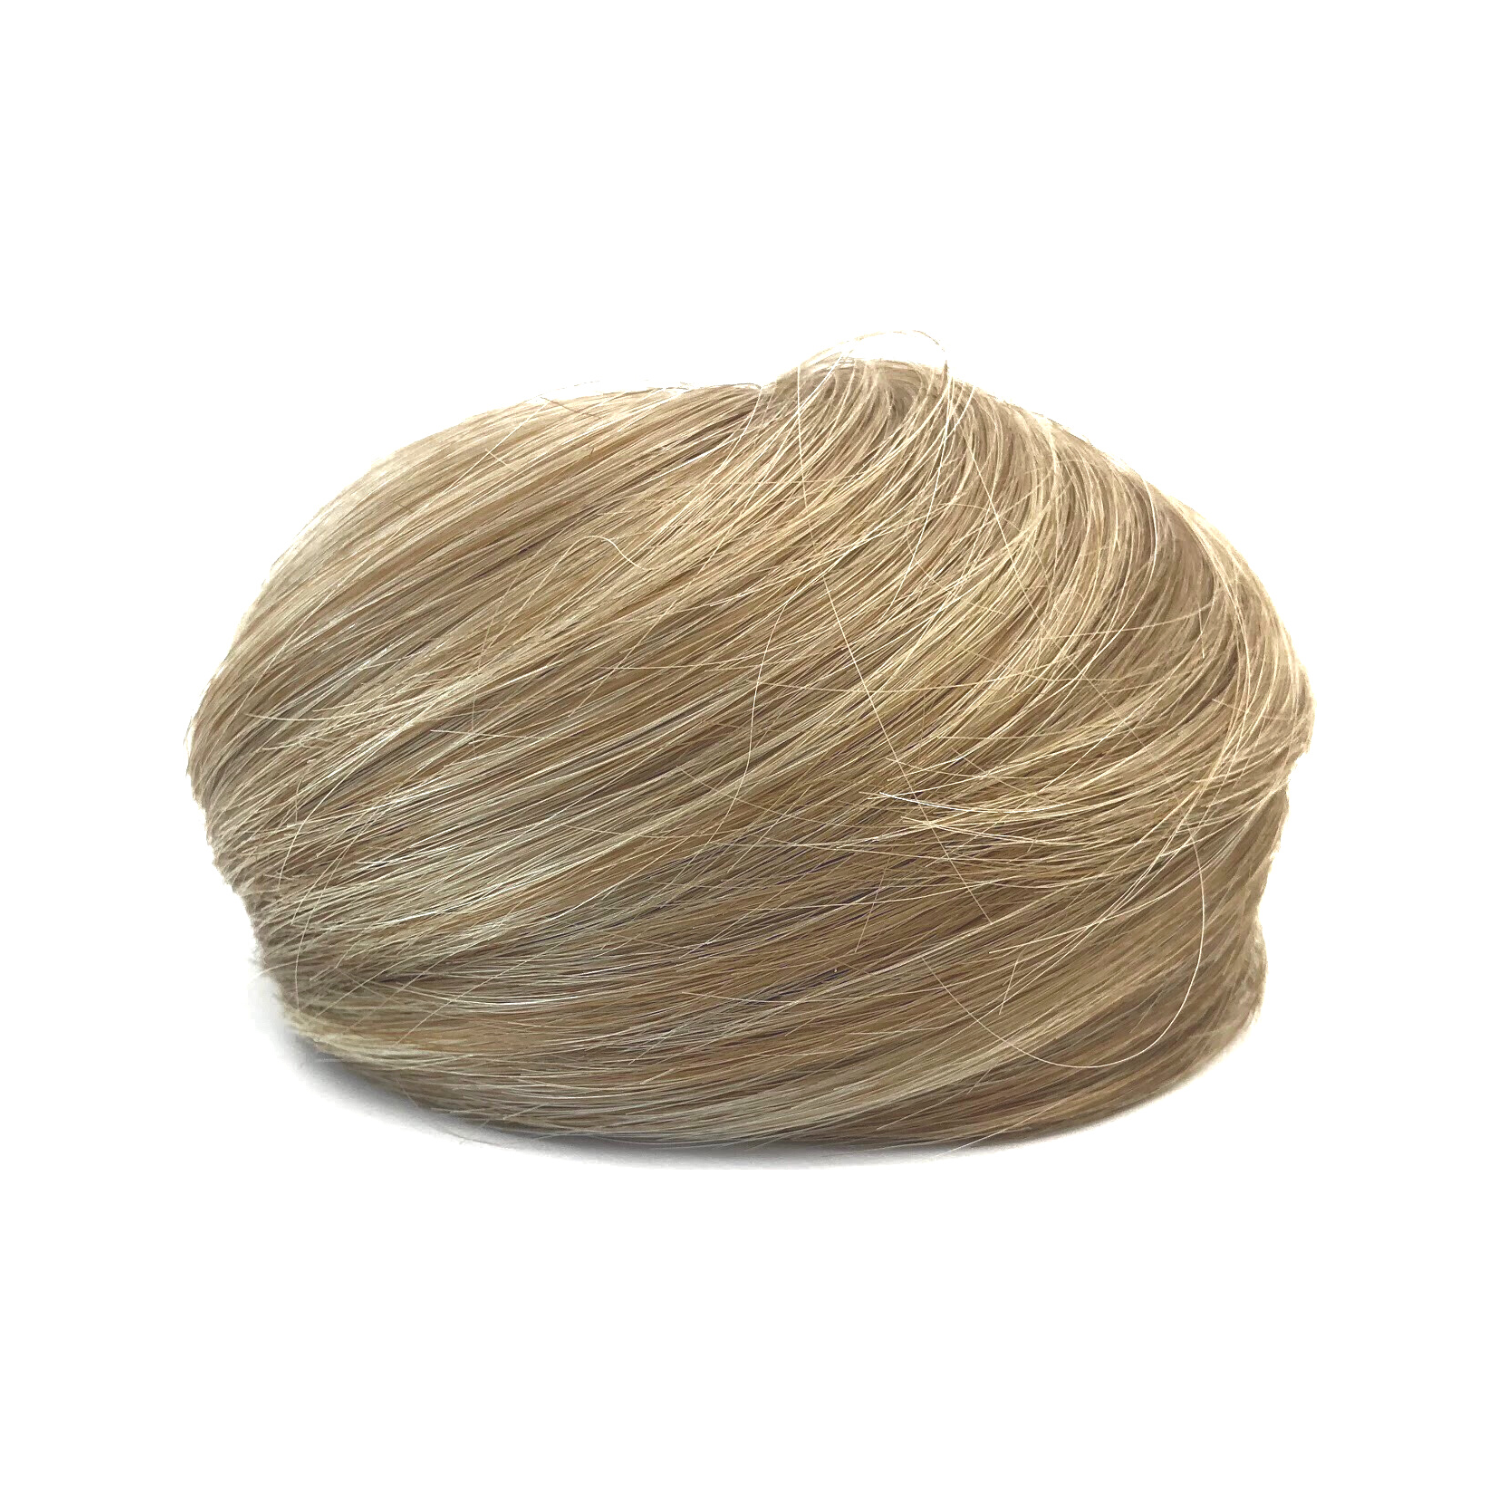 image of hair rehab london clip on bun hairpiece in shade beige